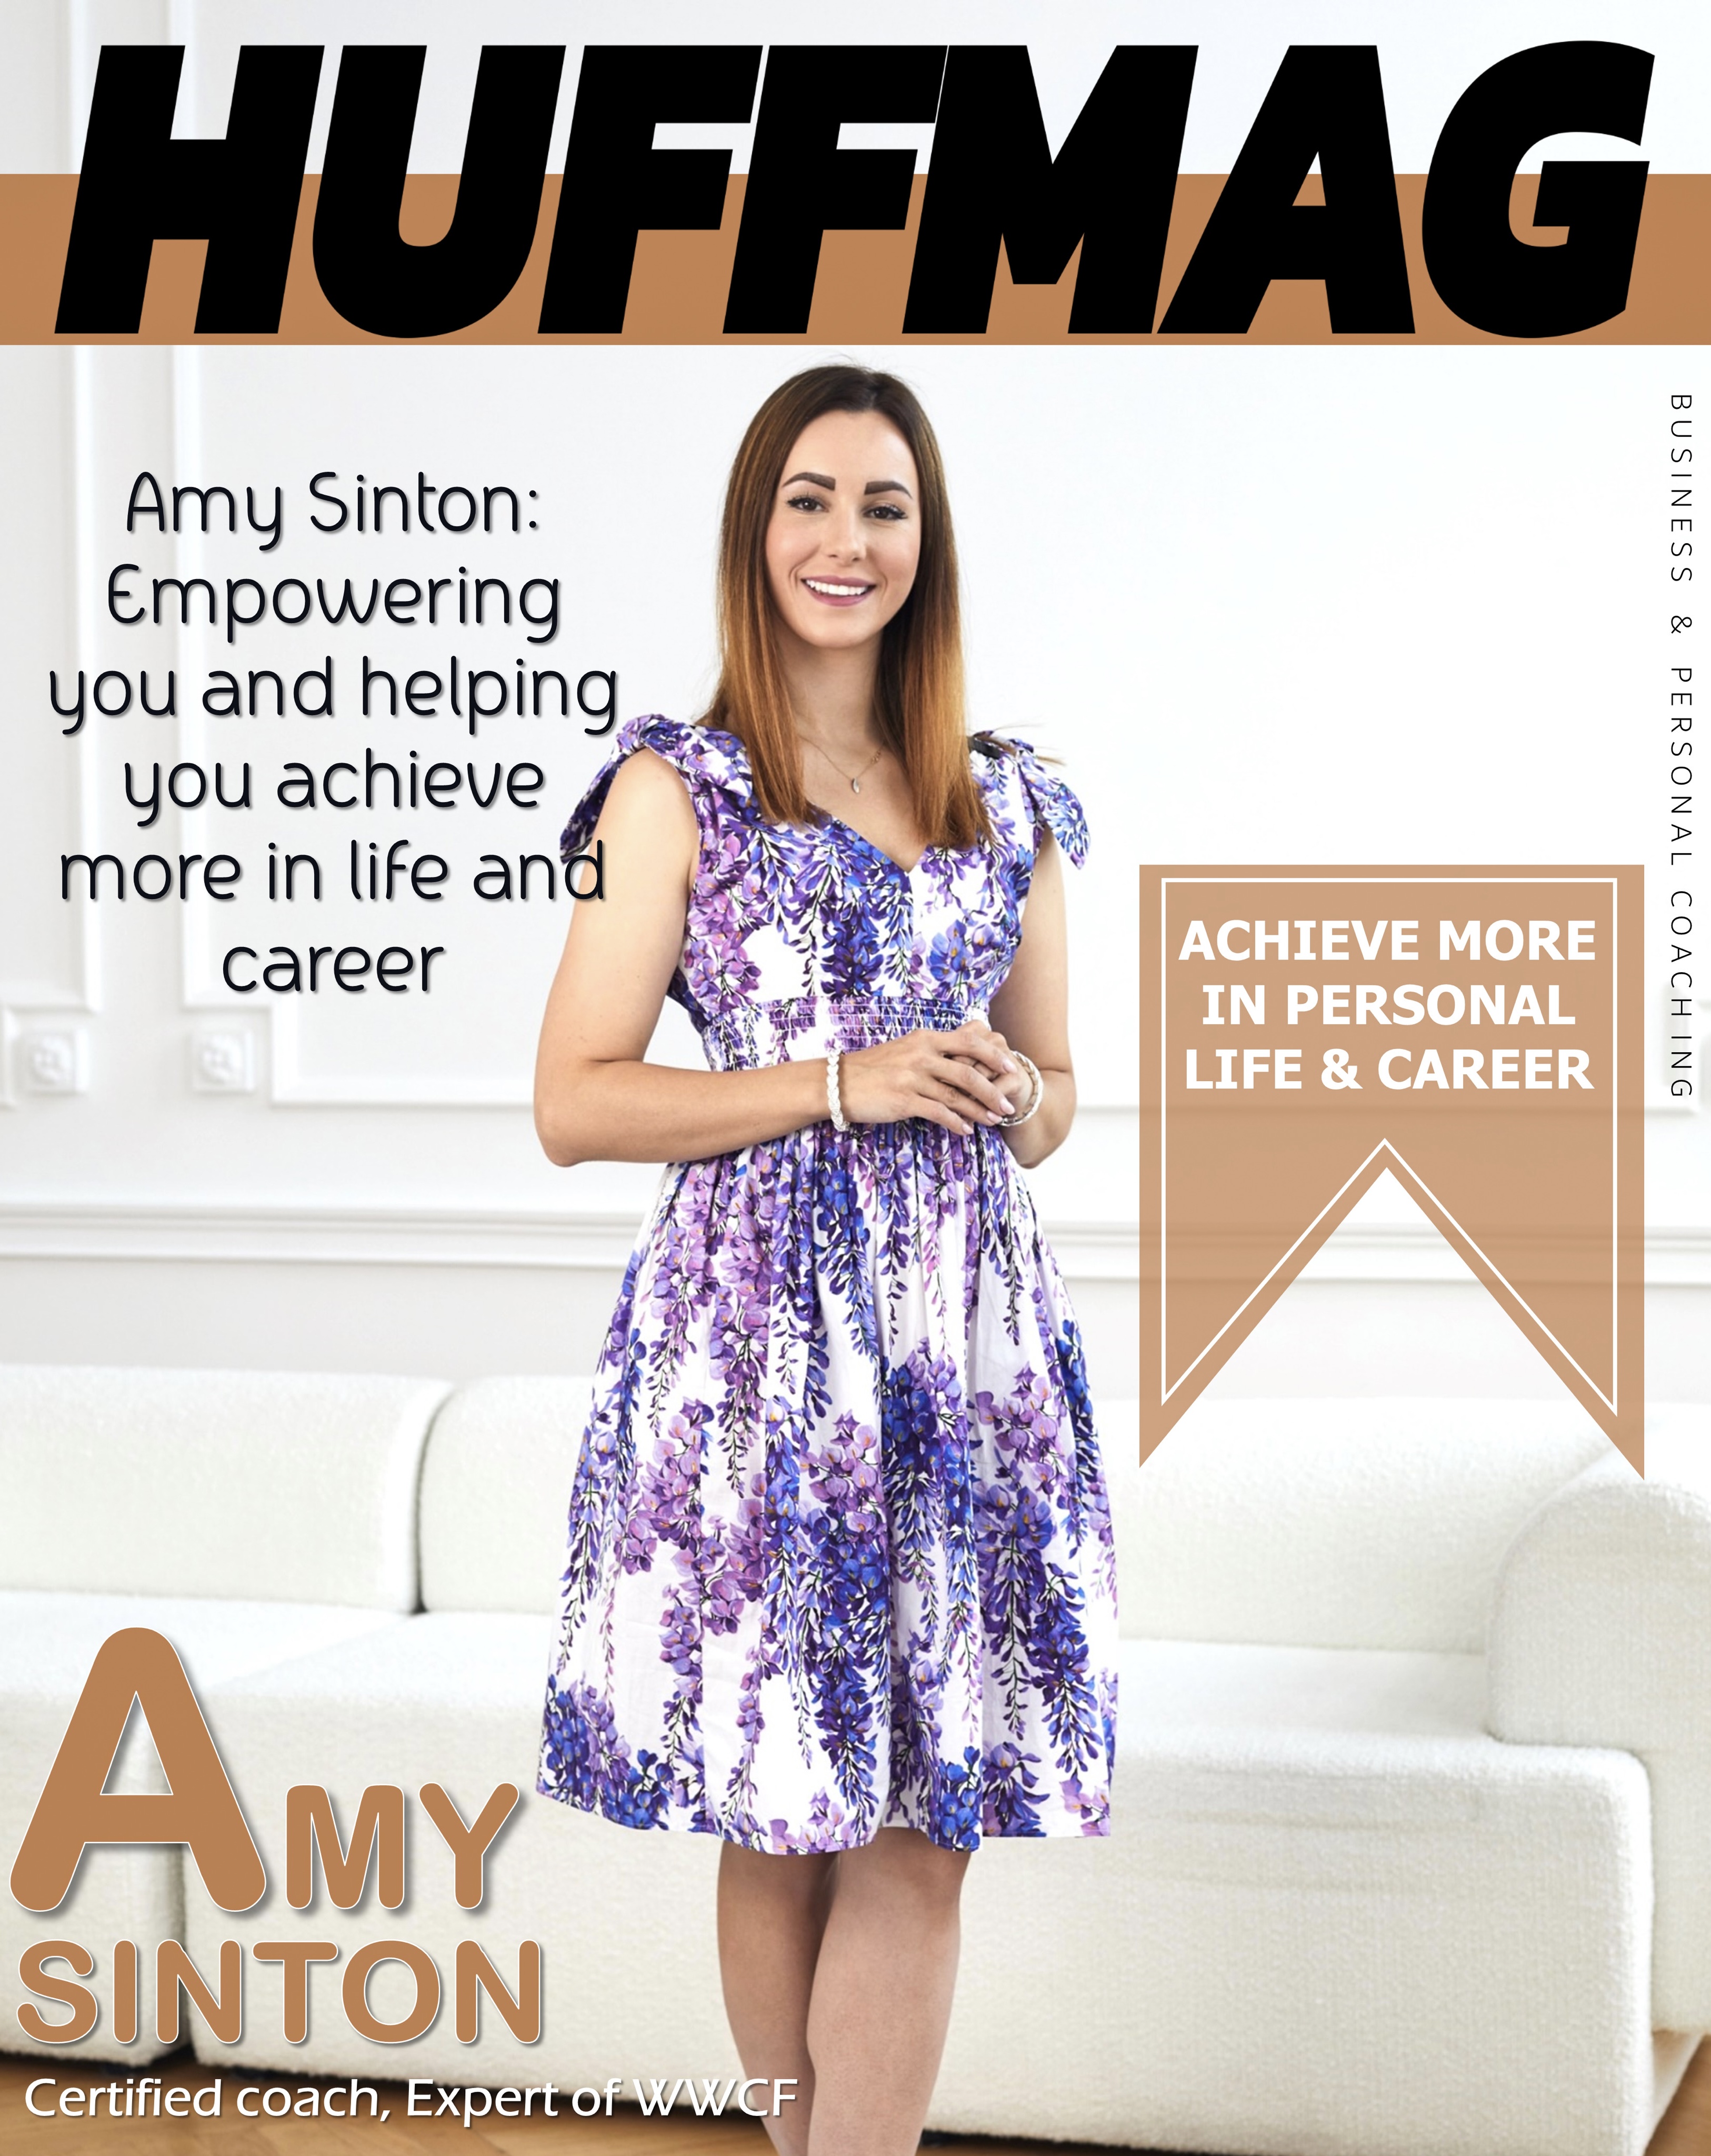 Amy Sinton: Empowering You And Helping You Achieve More In Life And Career.